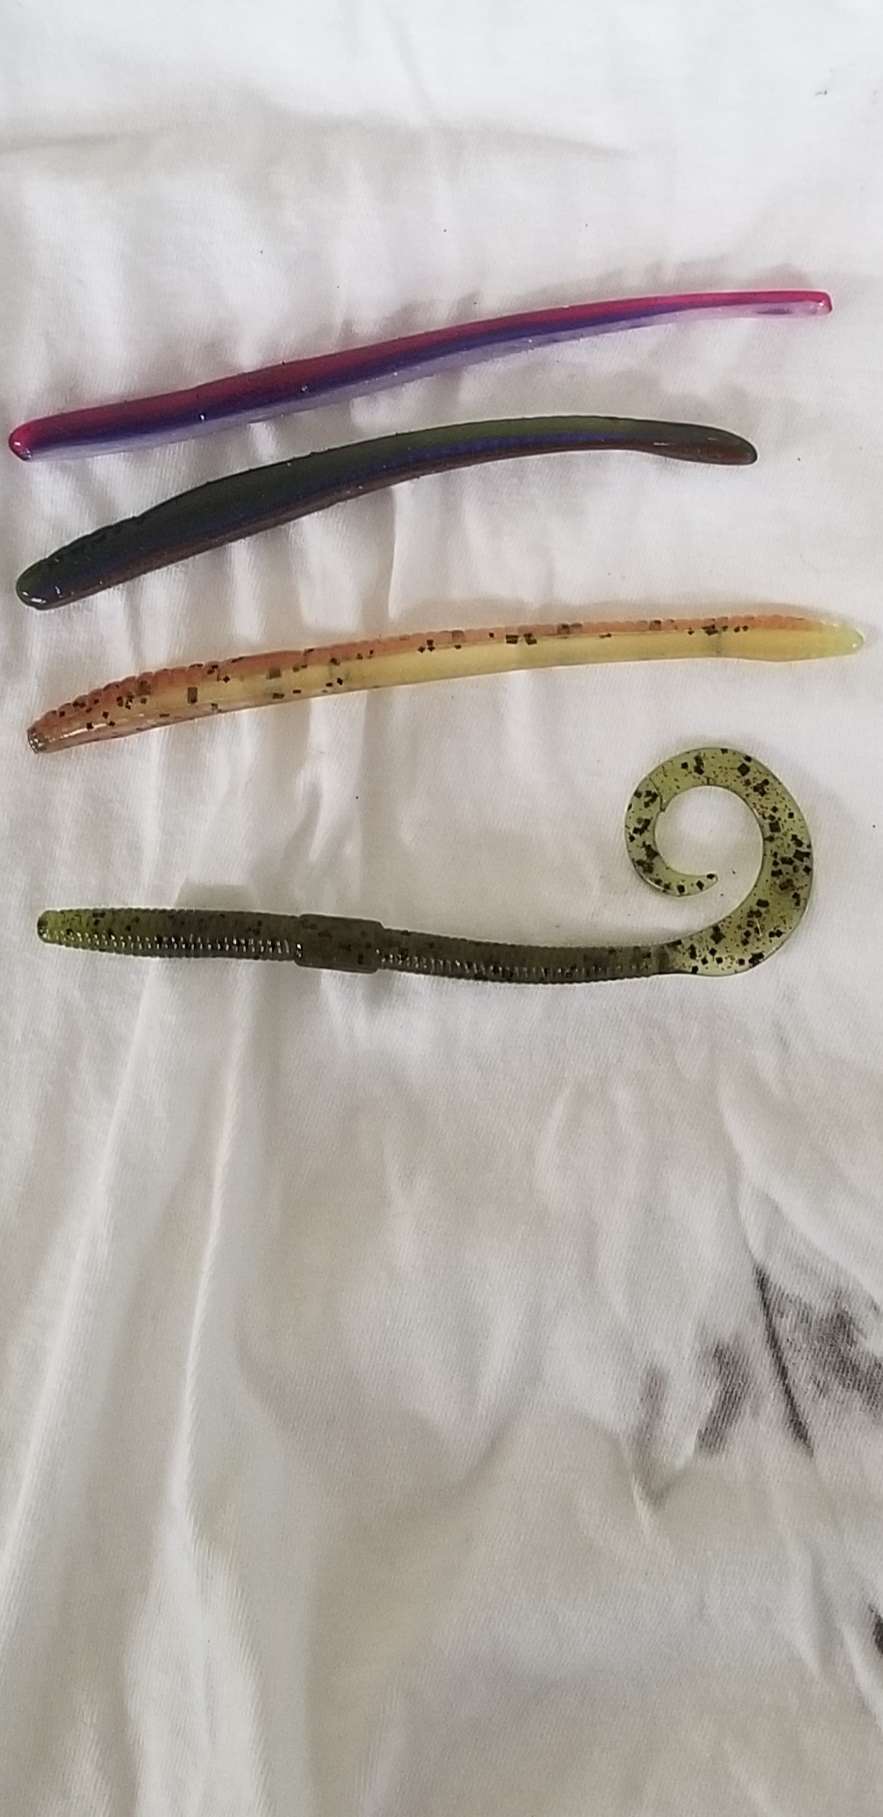 Finesse worms - Fishing Tackle - Bass Fishing Forums